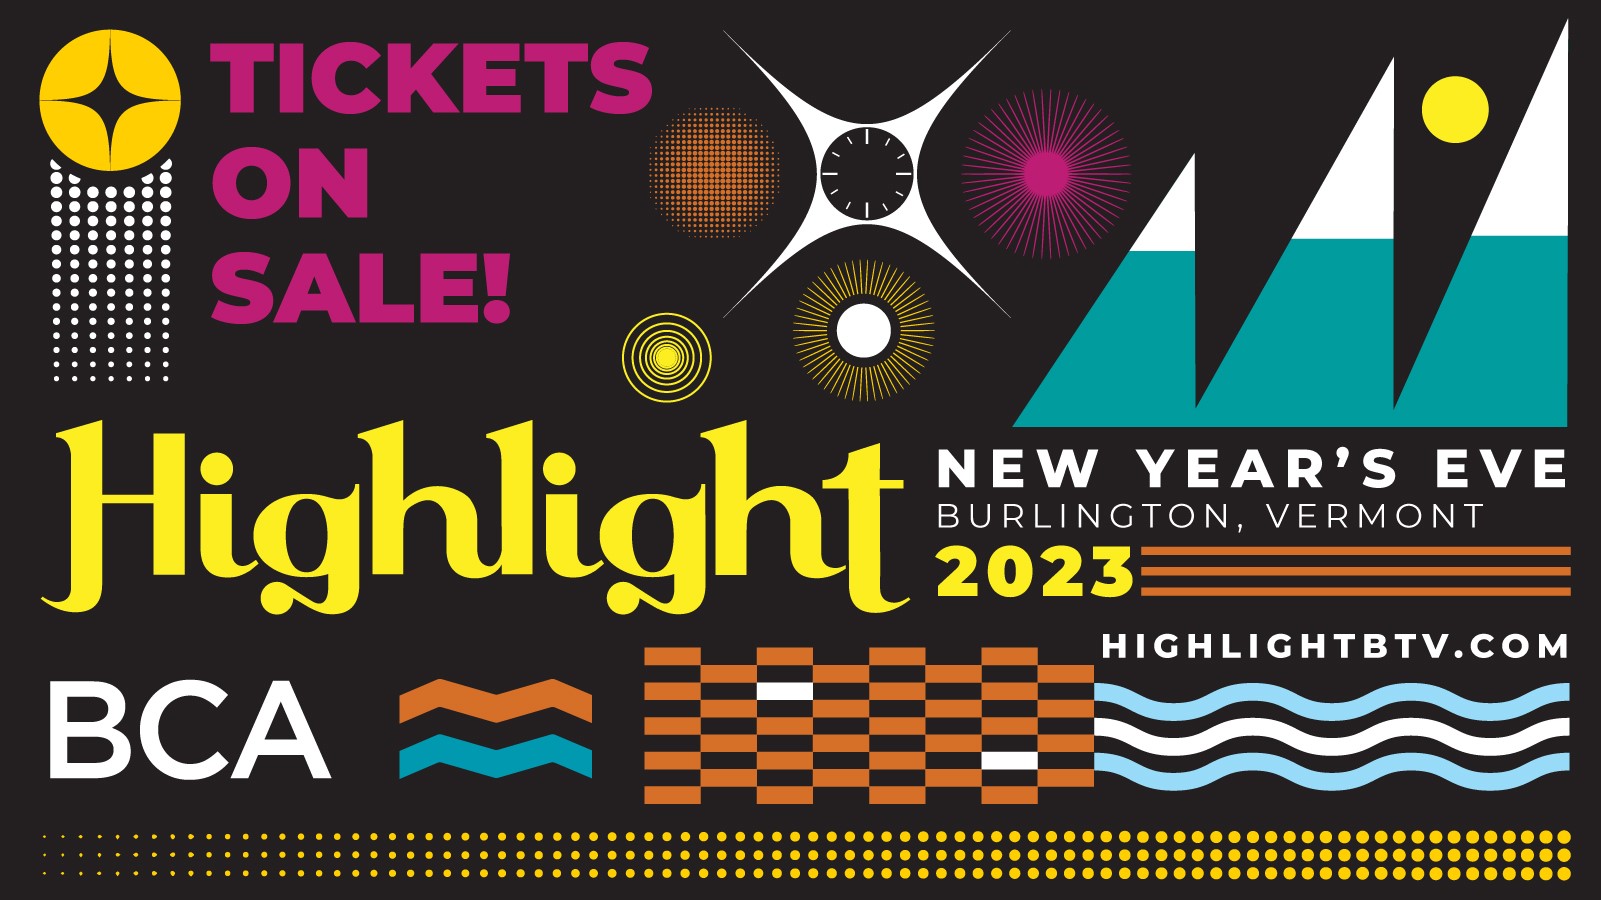 A graphic banner for 2023 Highlight New Year's Eve in Burlington Vermont Tickets on Sale. Created by BCA Highlight is a Vermont-made revelry of art and ideas. Geometric shapes that form starbursts, mountains, waves, and a checkerboard of bricks in aqua, orange, yellow, pink, and white are on a black background. Learn more at HighlightBTV.com